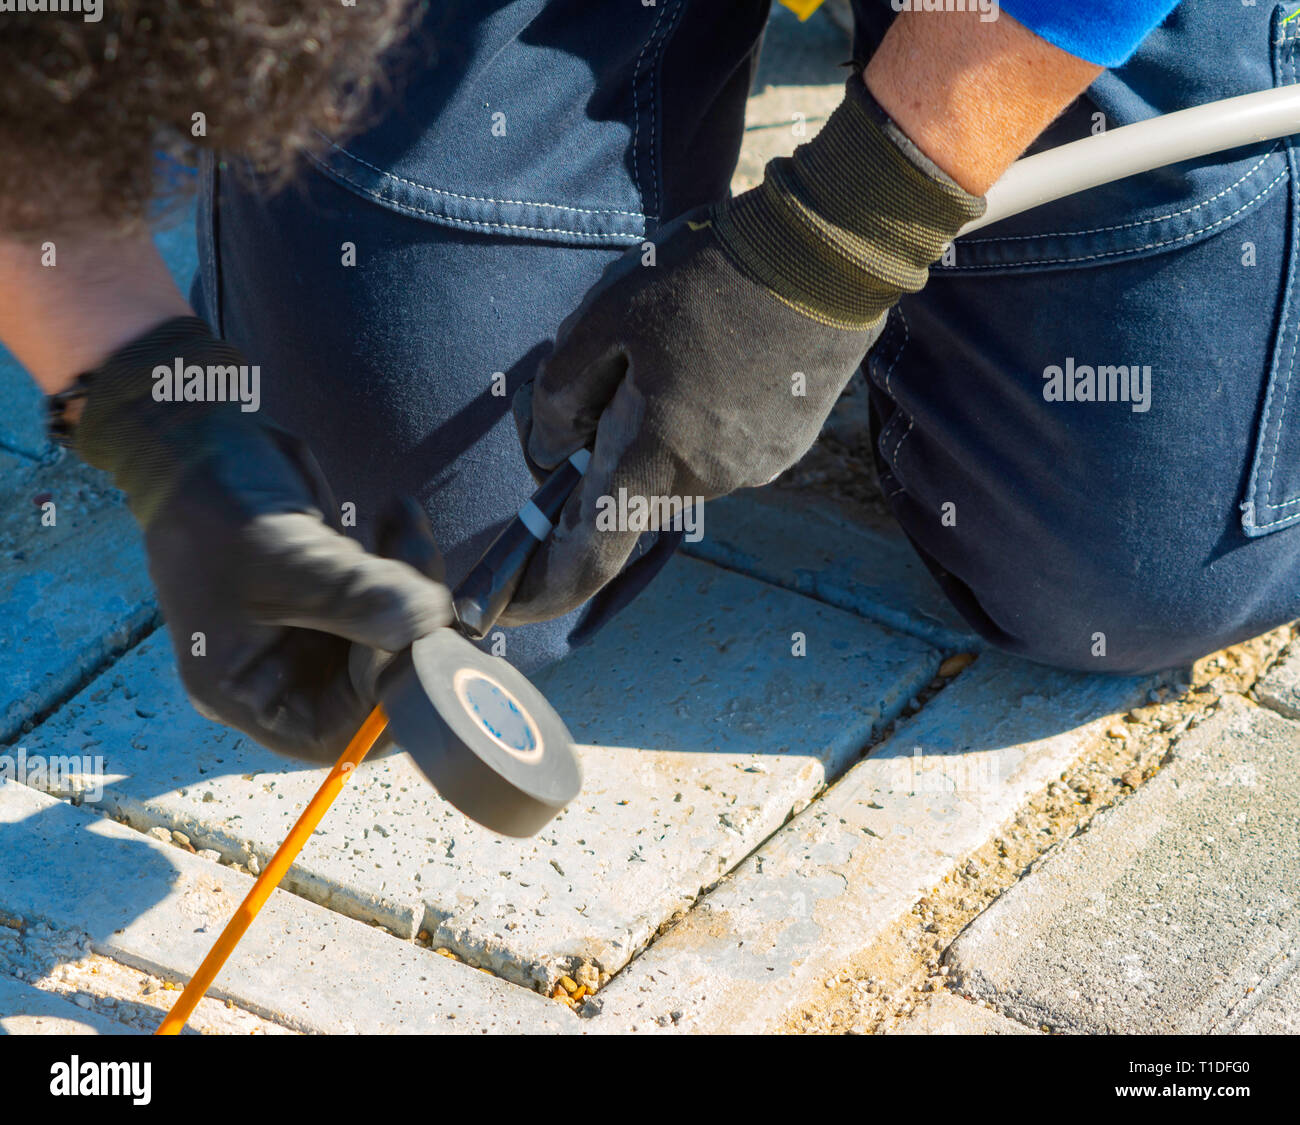 Technicians connection of an electrical cable break Stock Photo